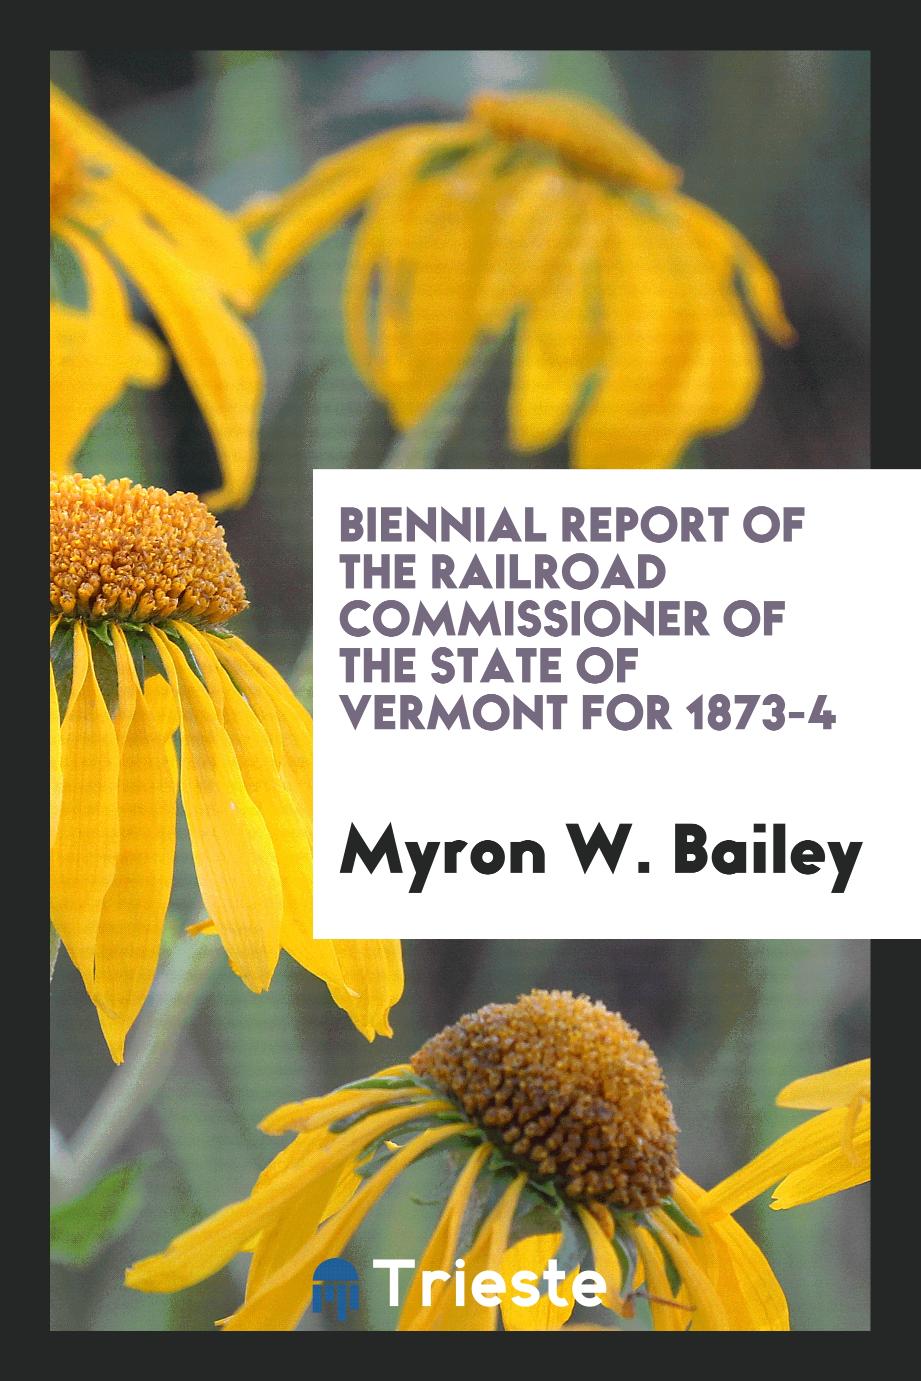 Biennial Report of the Railroad Commissioner of the State of Vermont for 1873-4